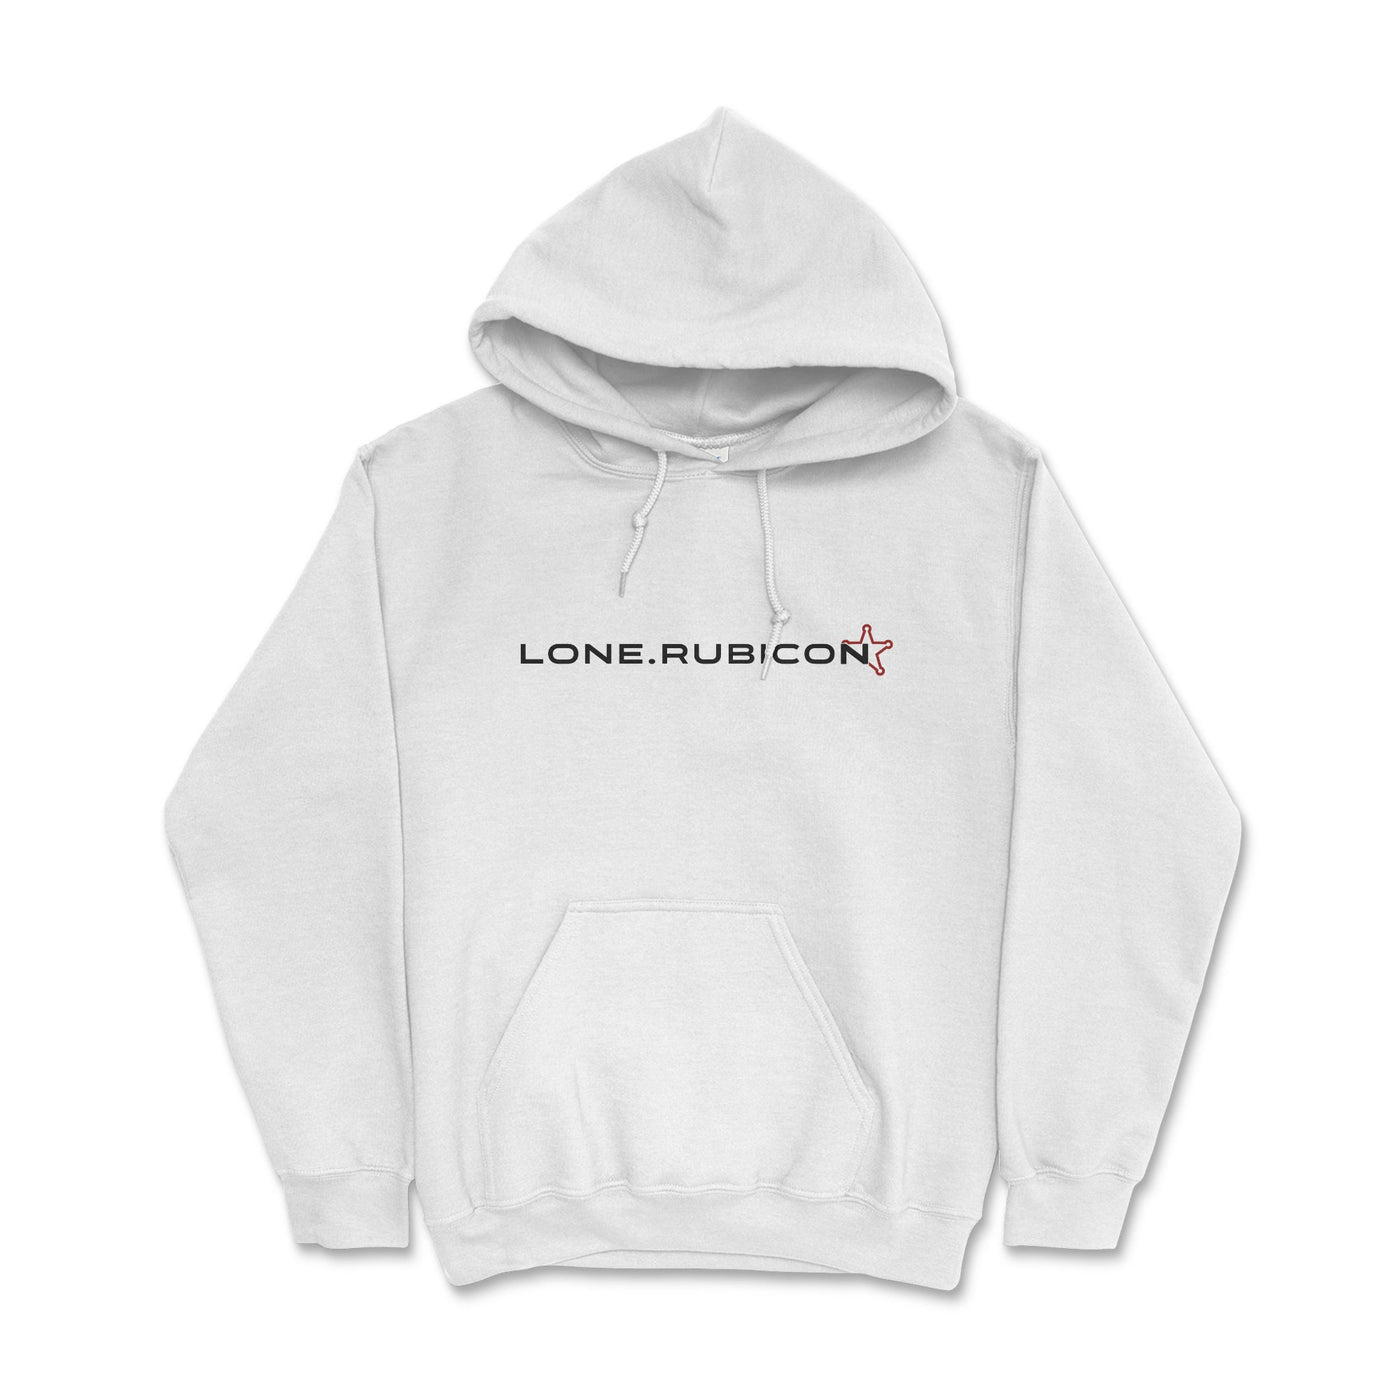 Lone Rubicon Offroad Lifestyle Hoodie - Goats Trail Off-Road Apparel Company